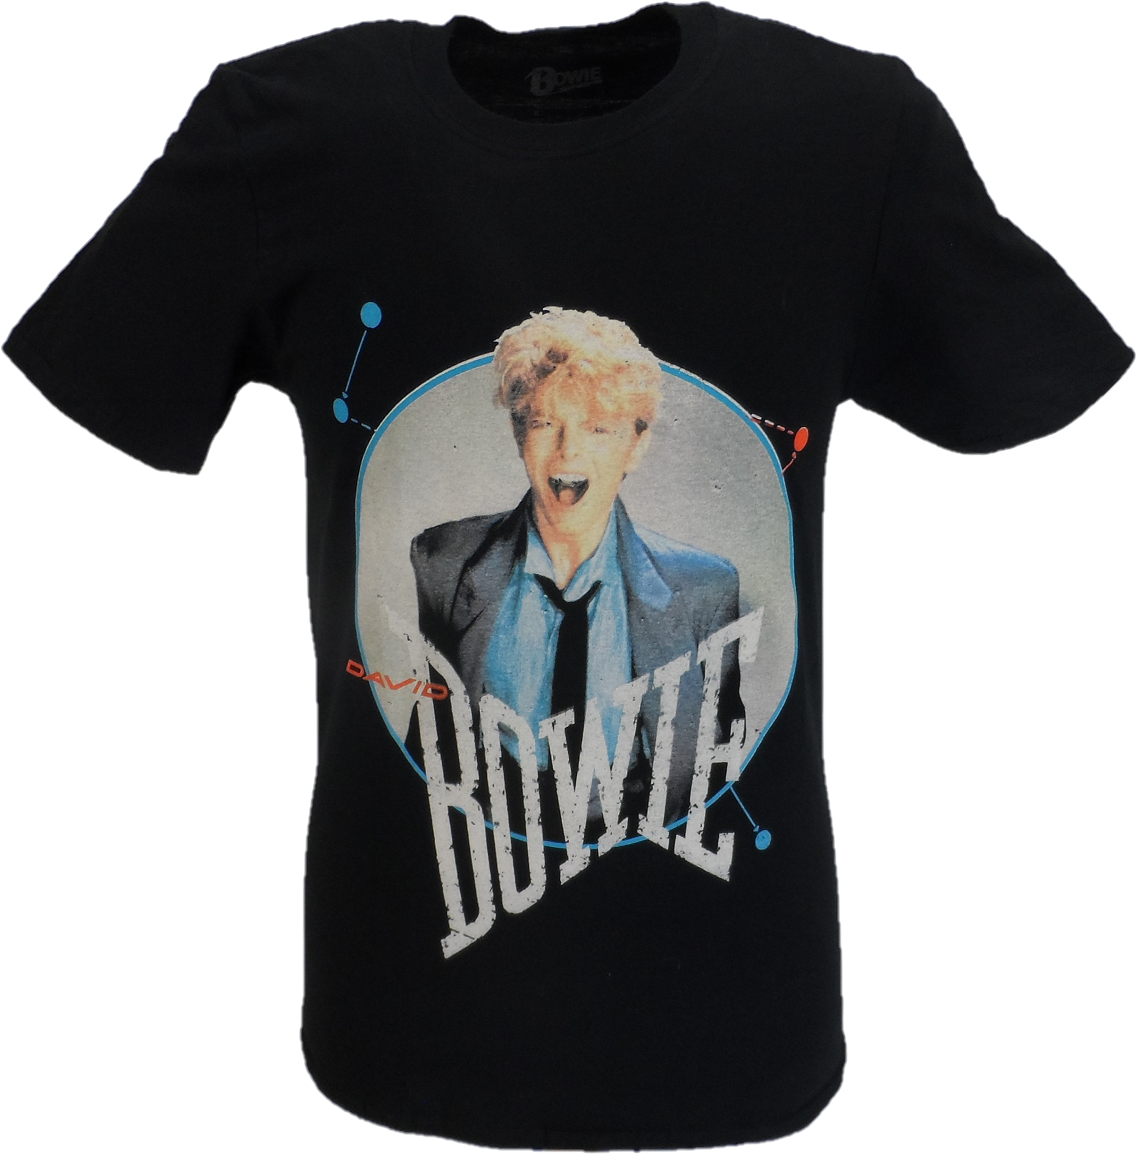 Mens Official Licensed David Bowie Serious Moonlight Tour T Shirt